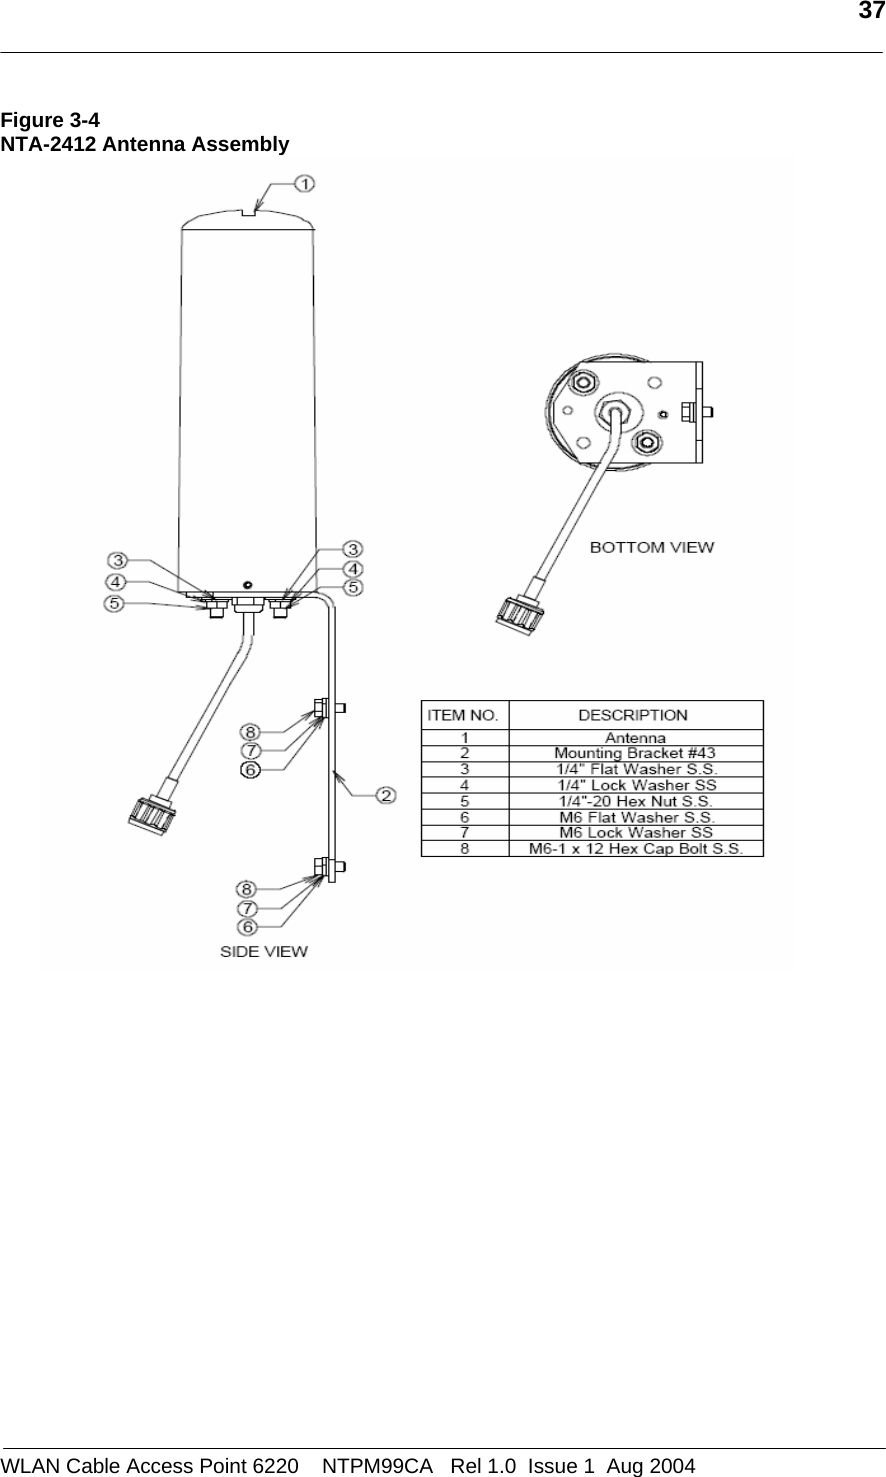   37  Figure 3-4 NTA-2412 Antenna Assembly  WLAN Cable Access Point 6220    NTPM99CA   Rel 1.0  Issue 1  Aug 2004 